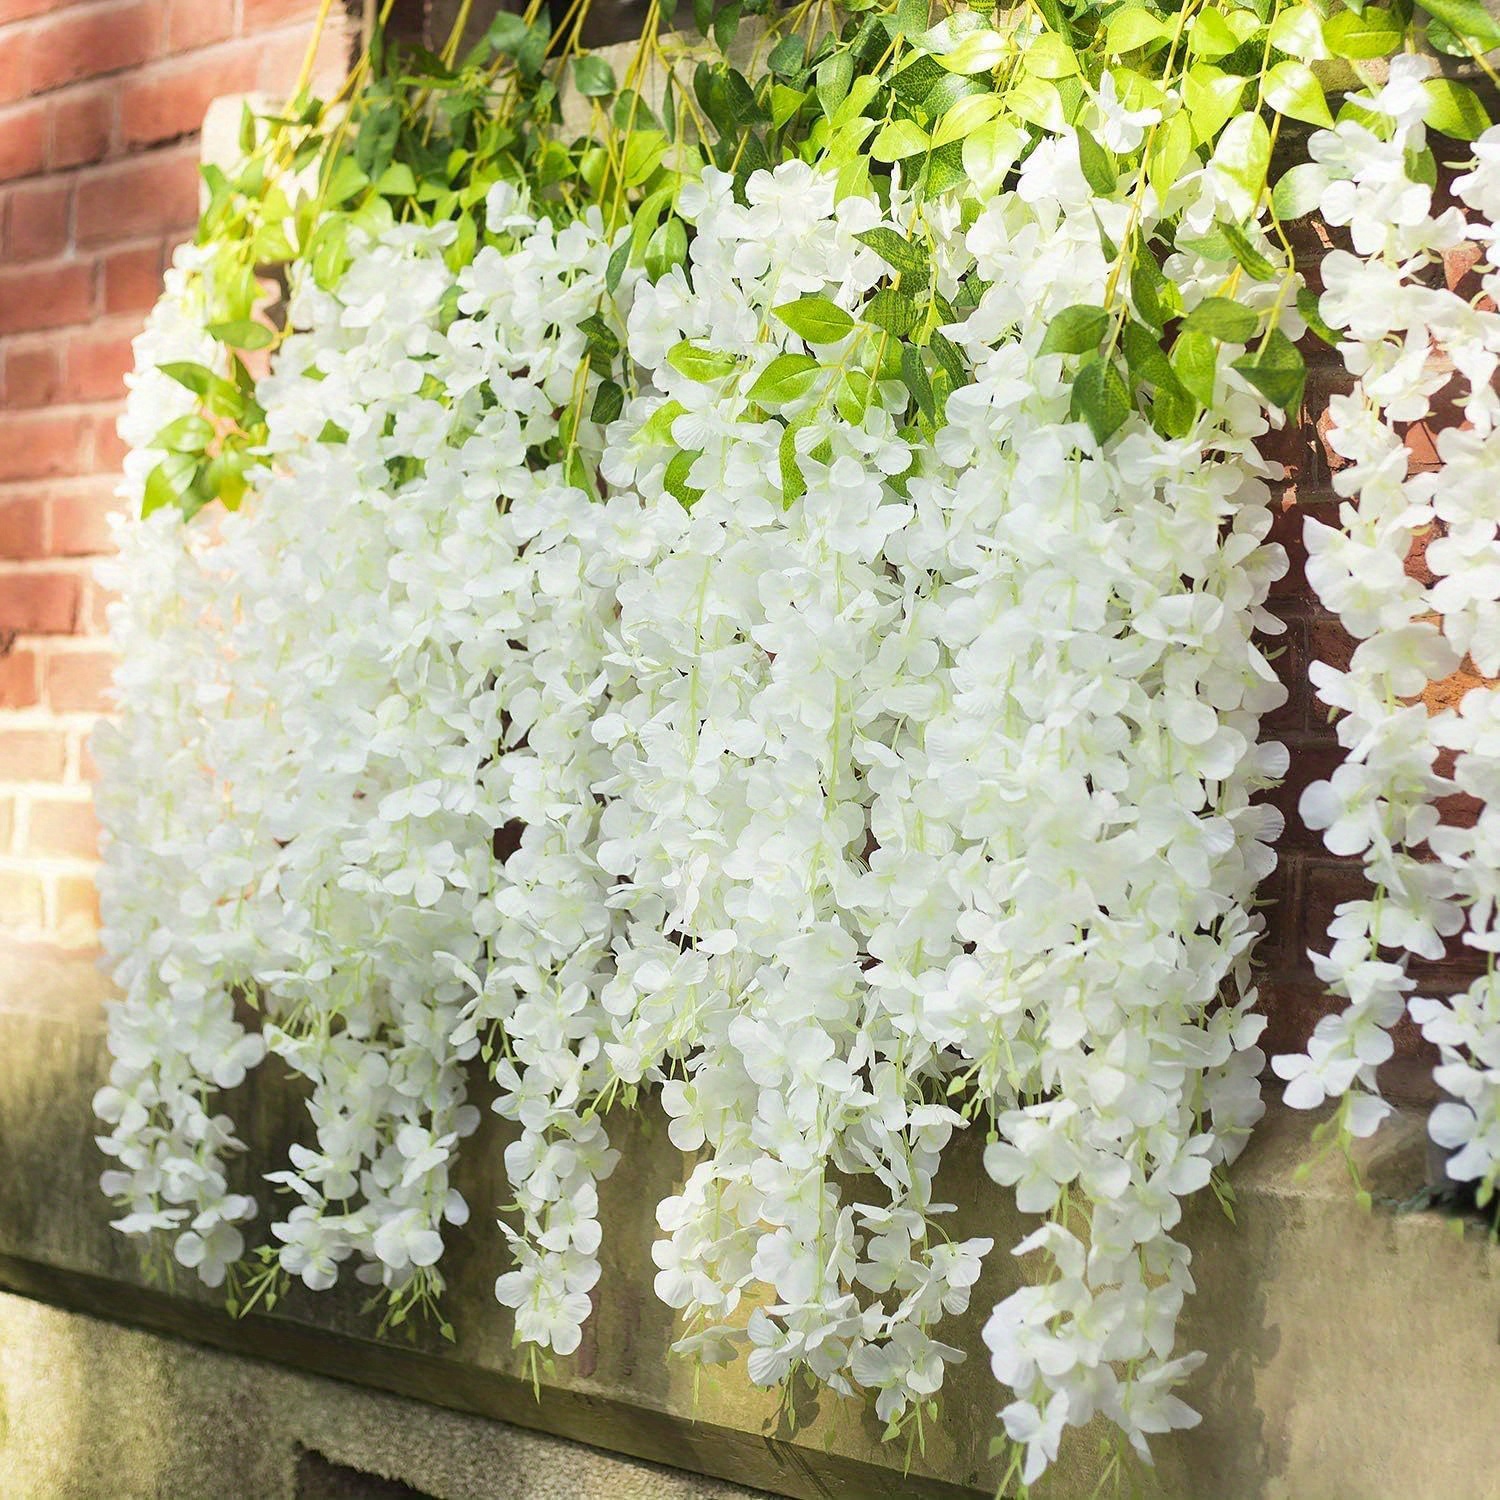 

24 Pack Artificial Wisteria Hanging Flowers Fake Wisteria Flower Garland Silk Vines Rattan Decor For Home Wedding Arch Wall Garden Greenery Bedroom Outdoor Office Party Decoration